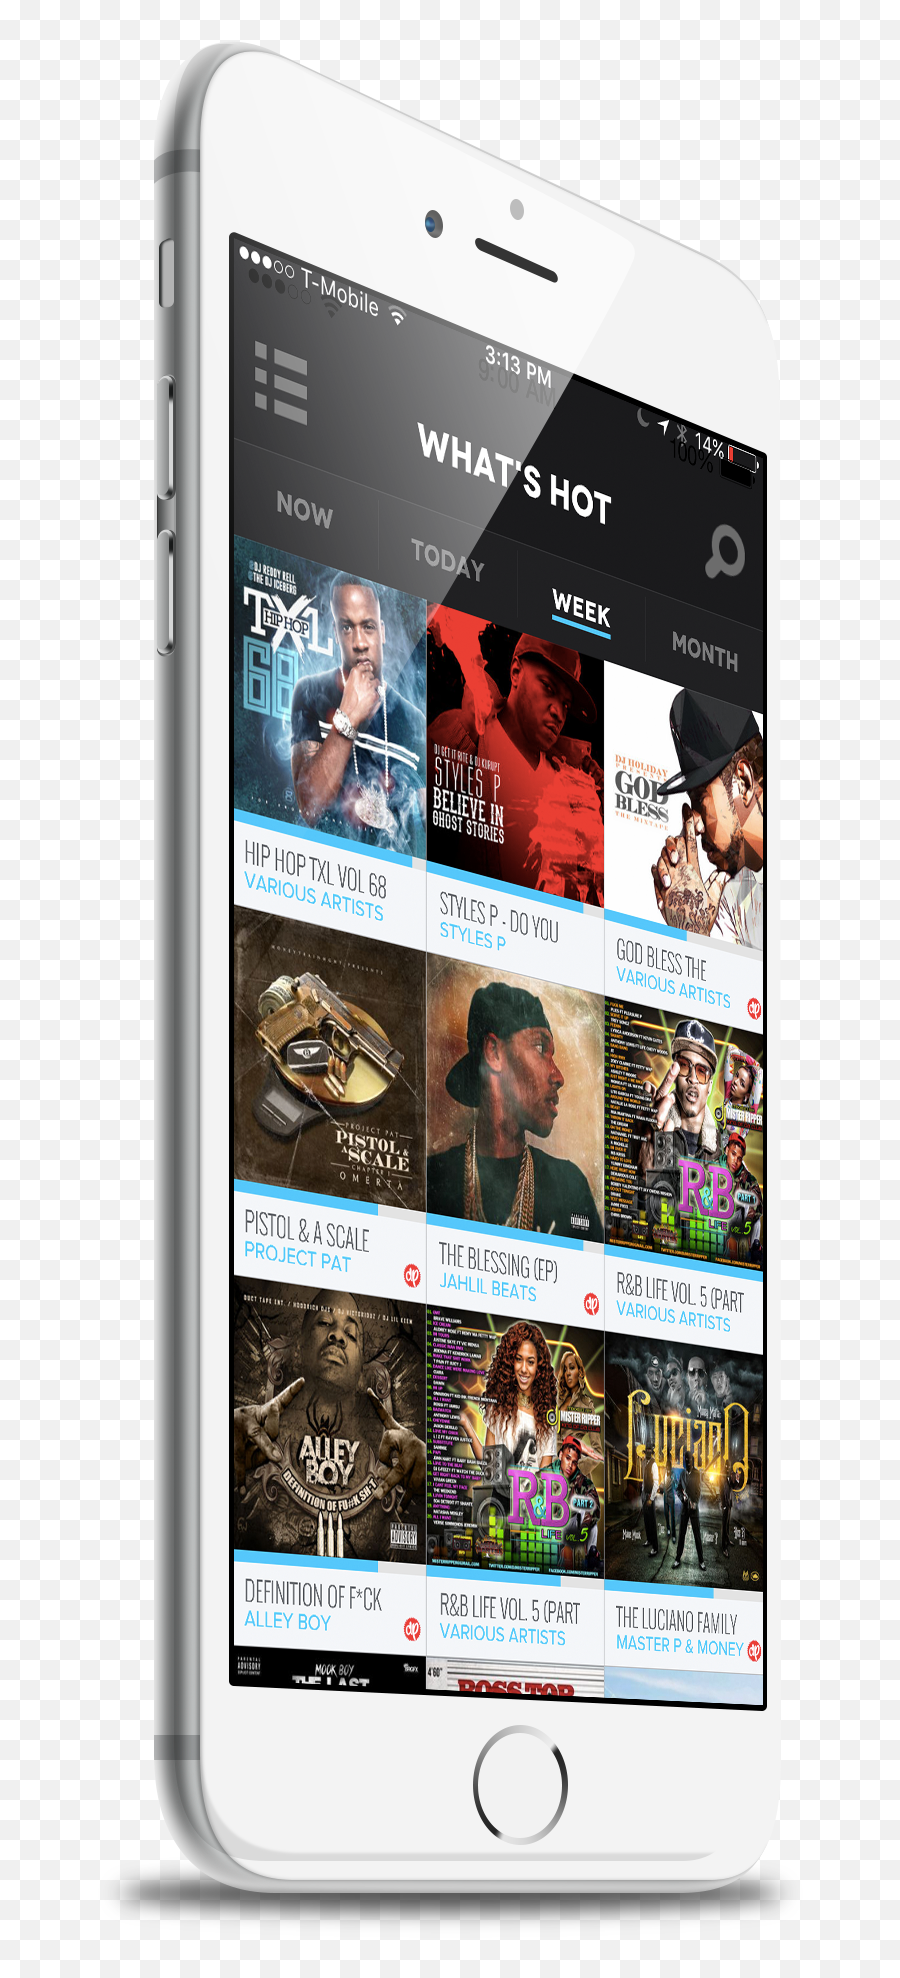 Datpiff Apps For Ios Android And - Smartphone Png,Datpiff Logo